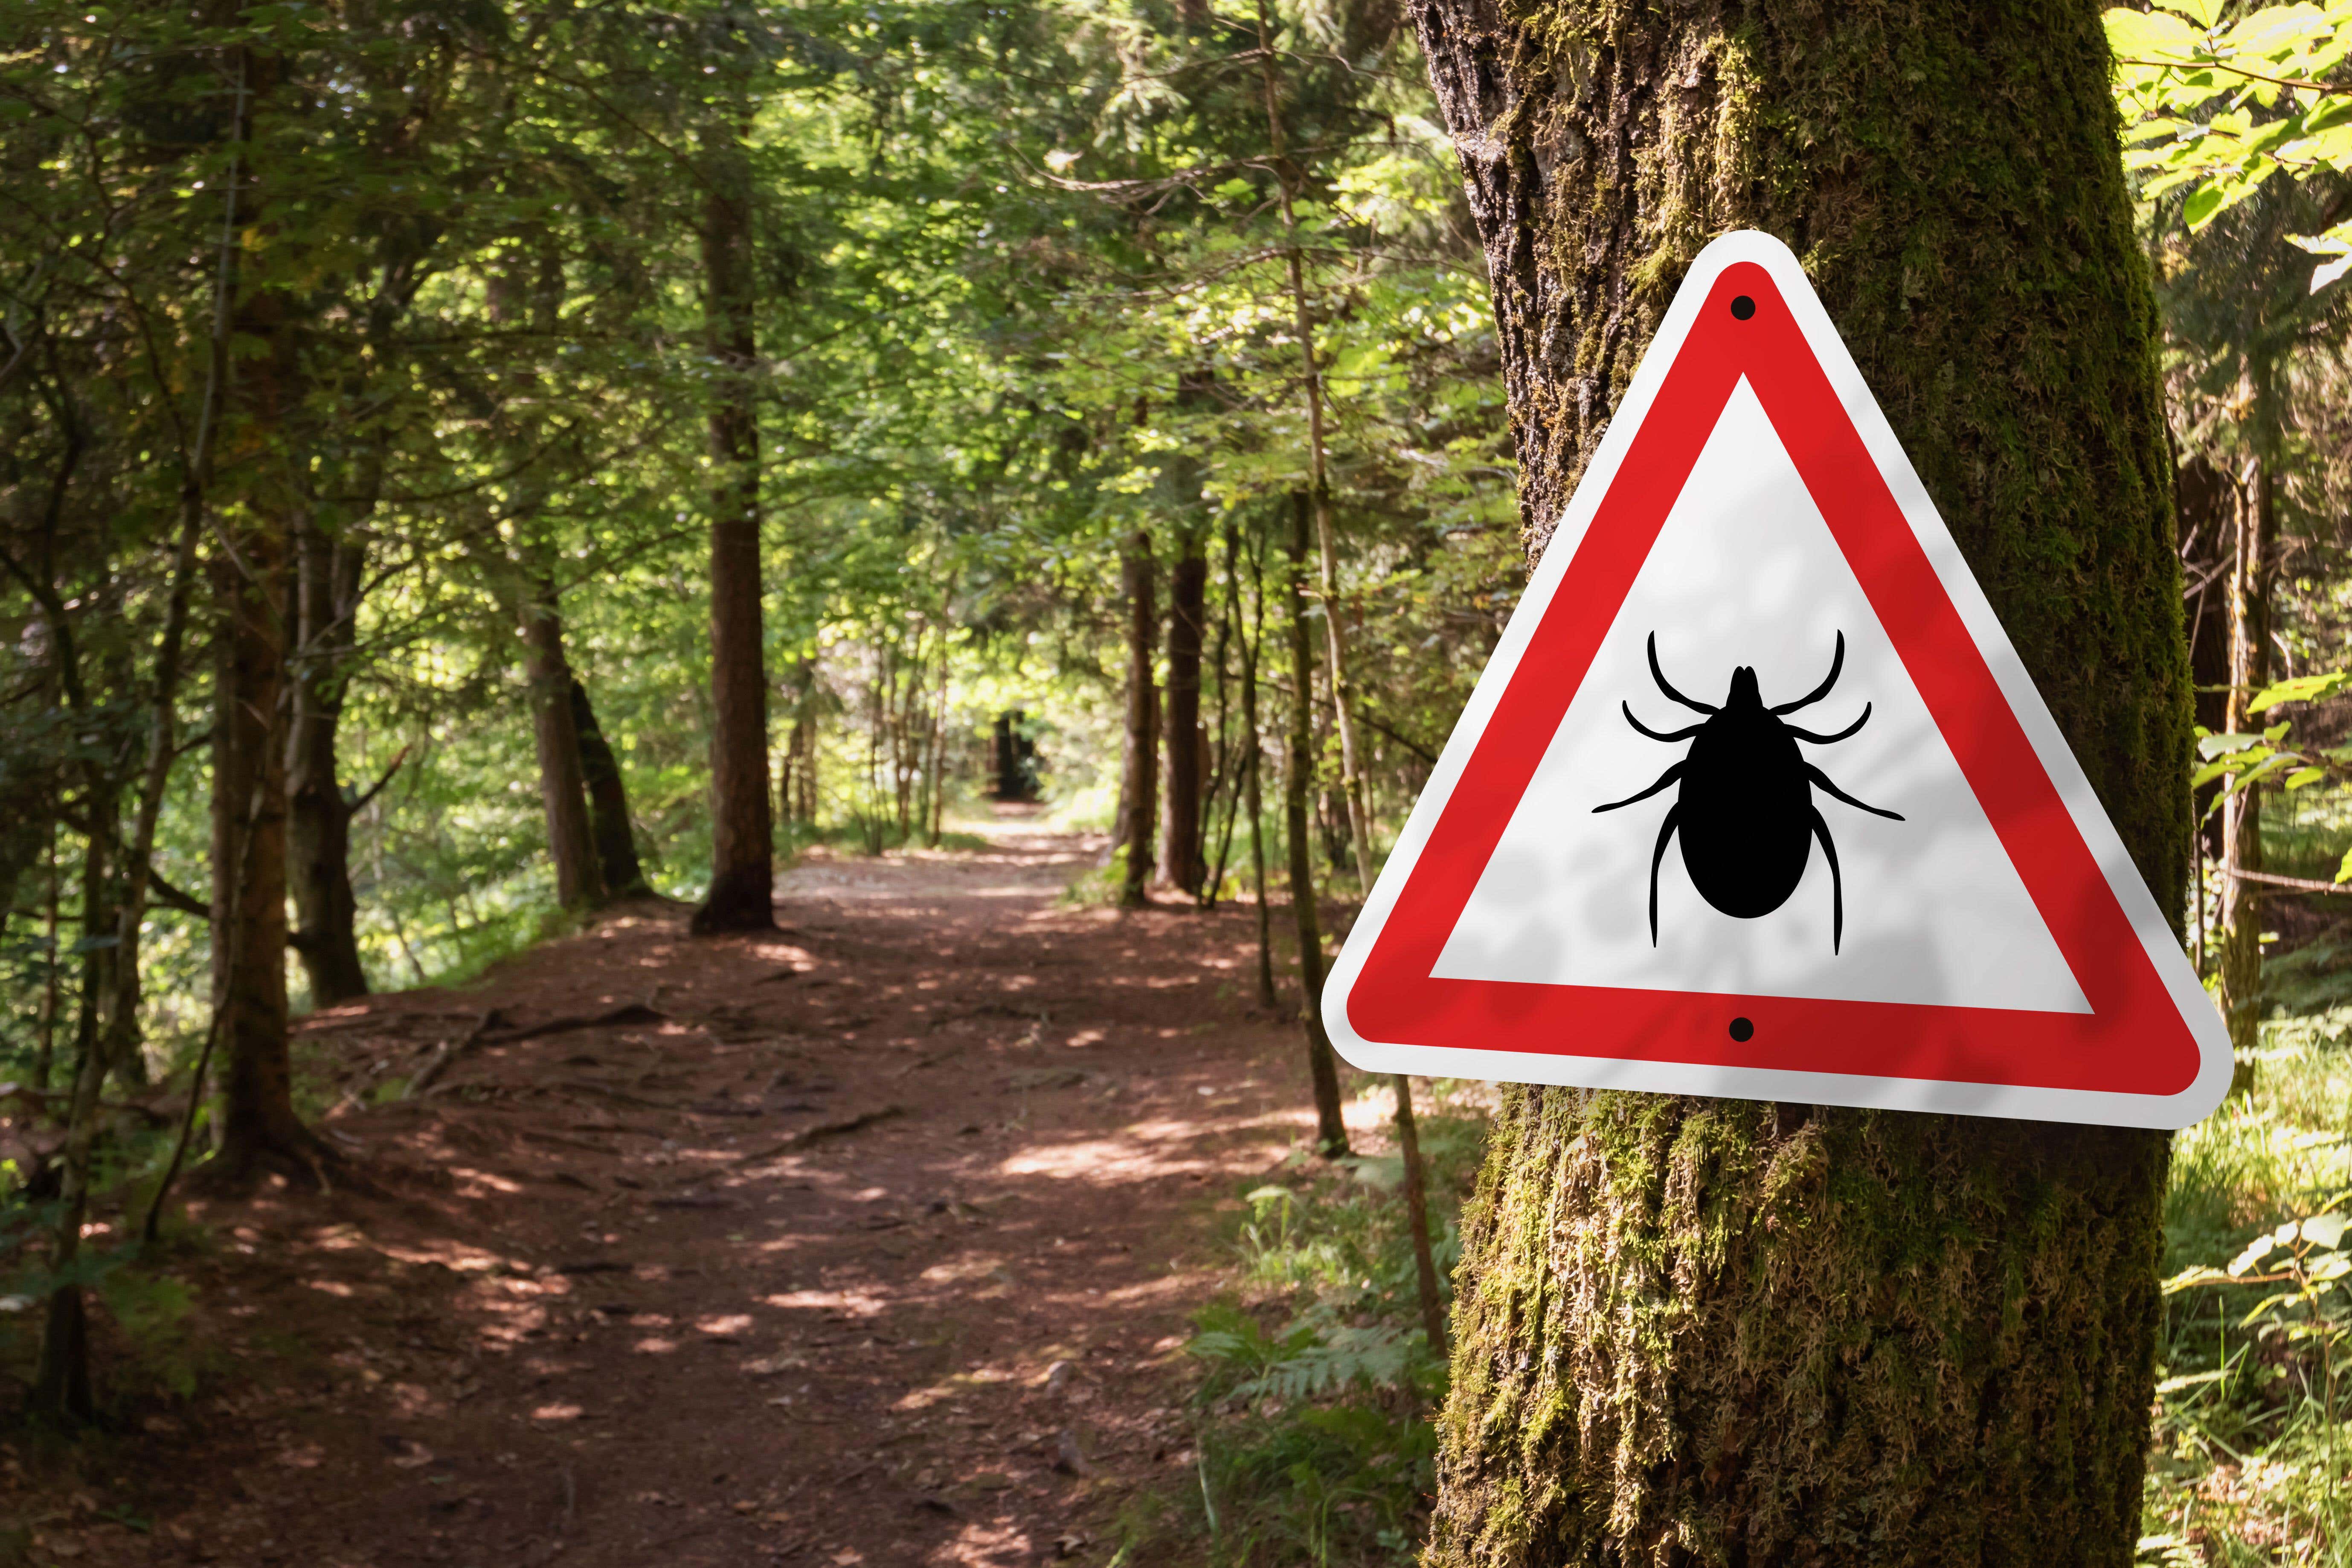 Tick-borne encephalitis is “likely” to be present in the UK, health officials have said, after the first domestically acquired case of the virus was confirmed in Yorkshire